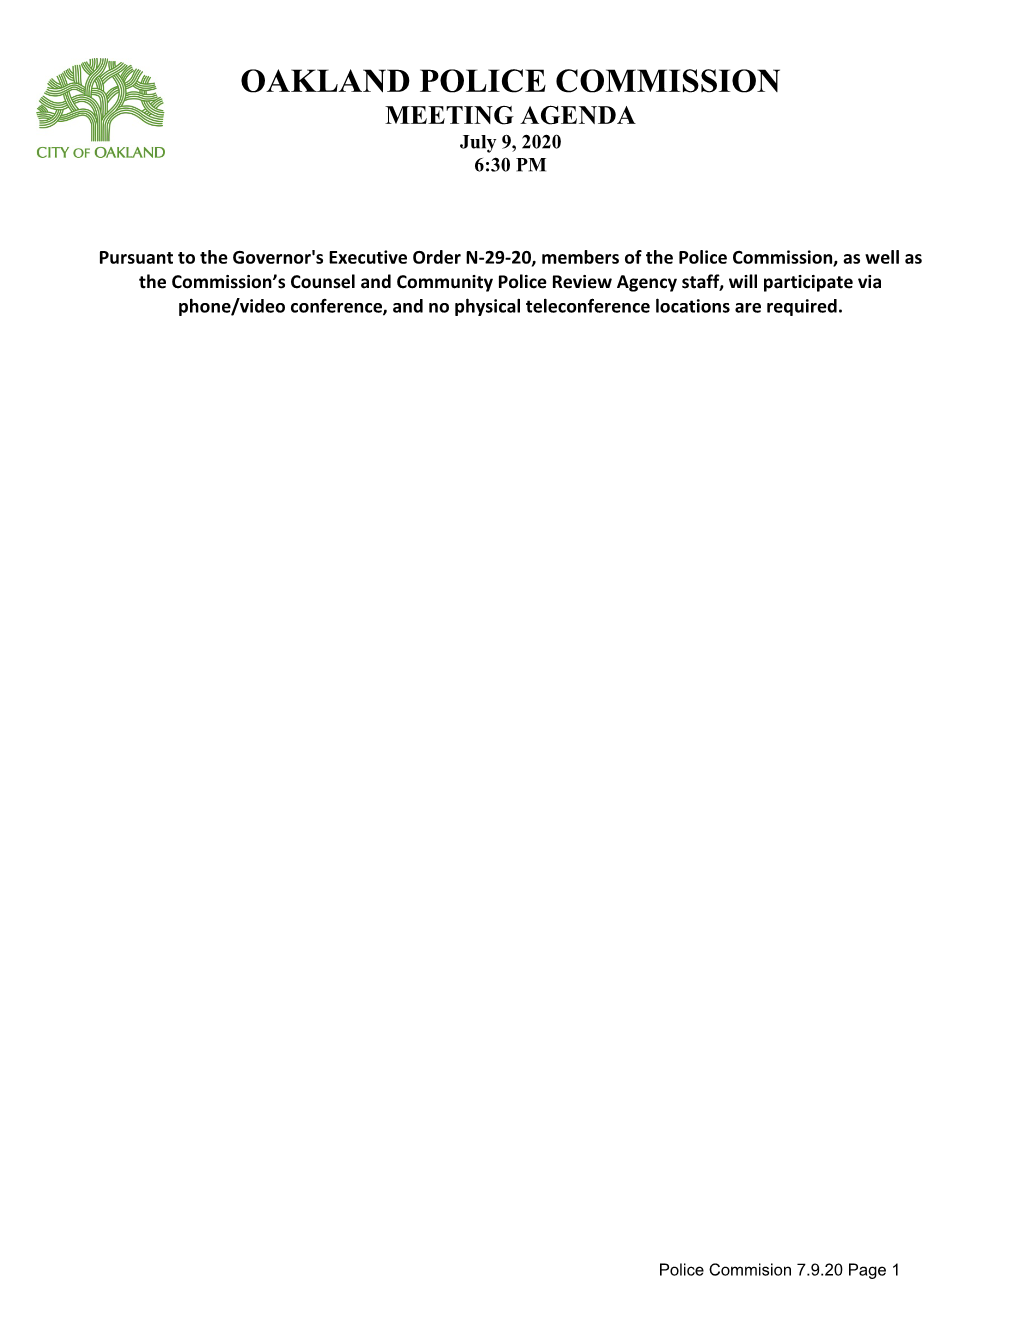 OAKLAND POLICE COMMISSION MEETING AGENDA July 9, 2020 6:30 PM